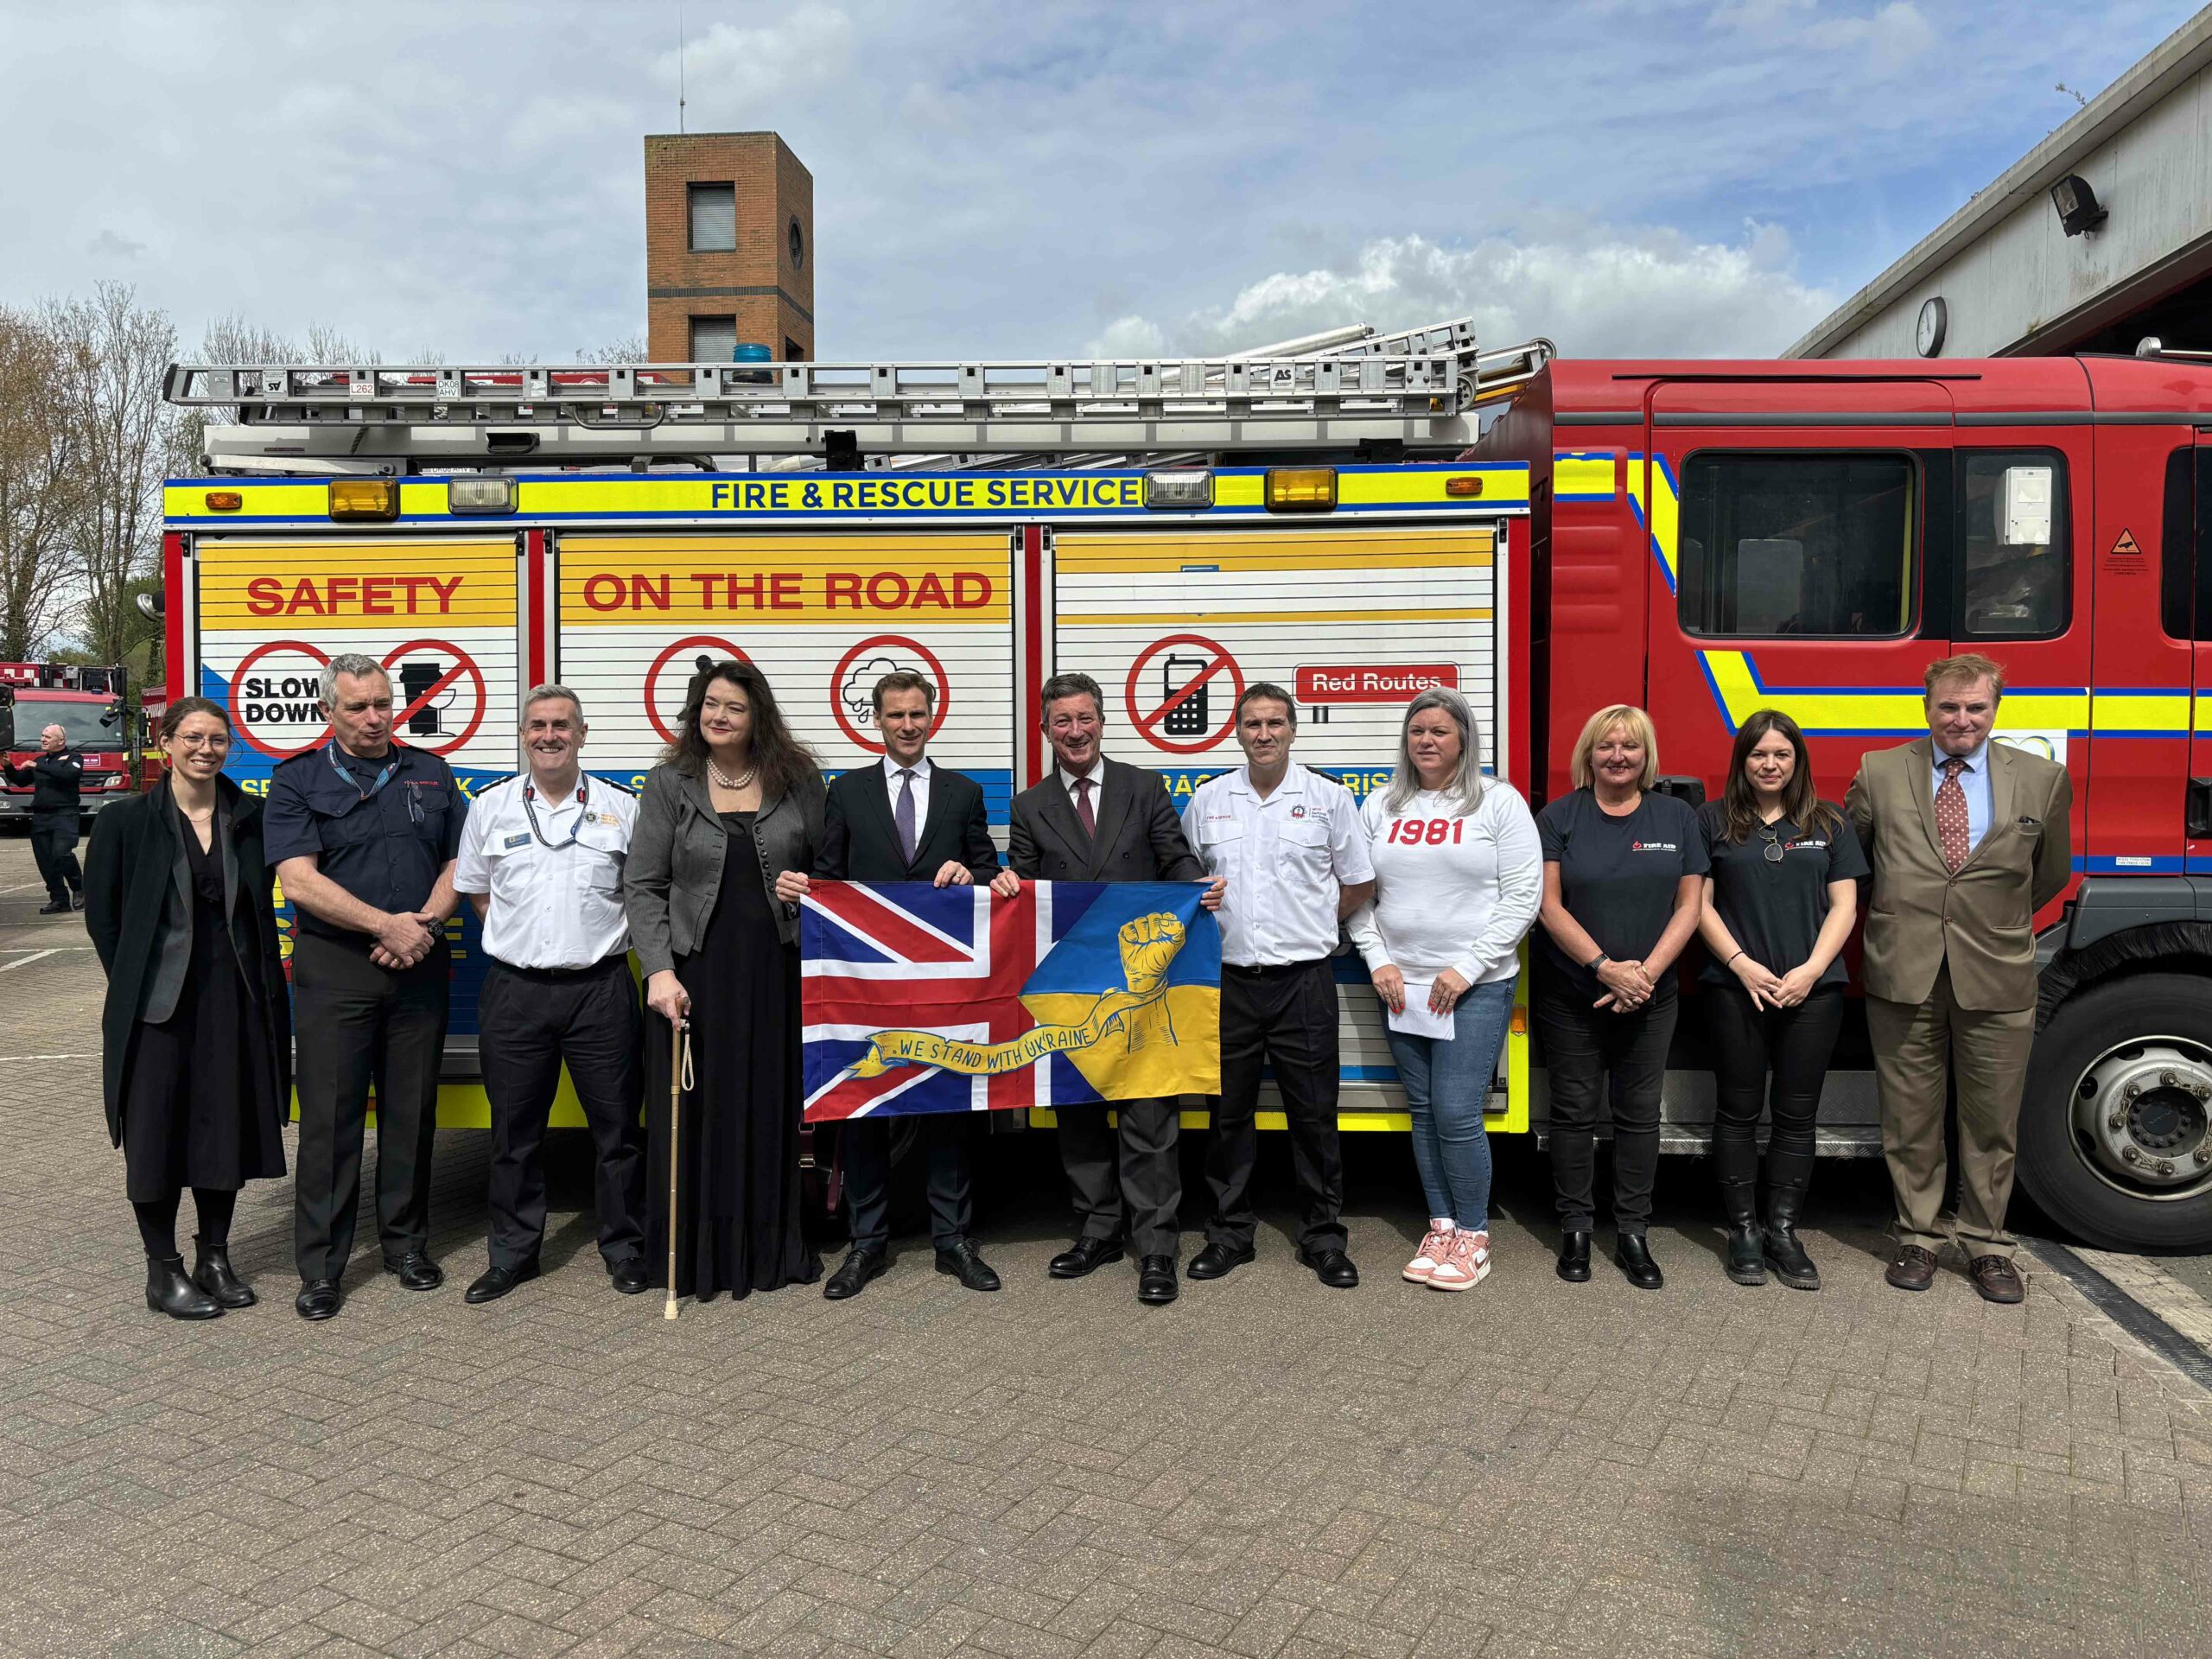 UK Fire and Rescue Service convoy to deliver equipment to Ukraine